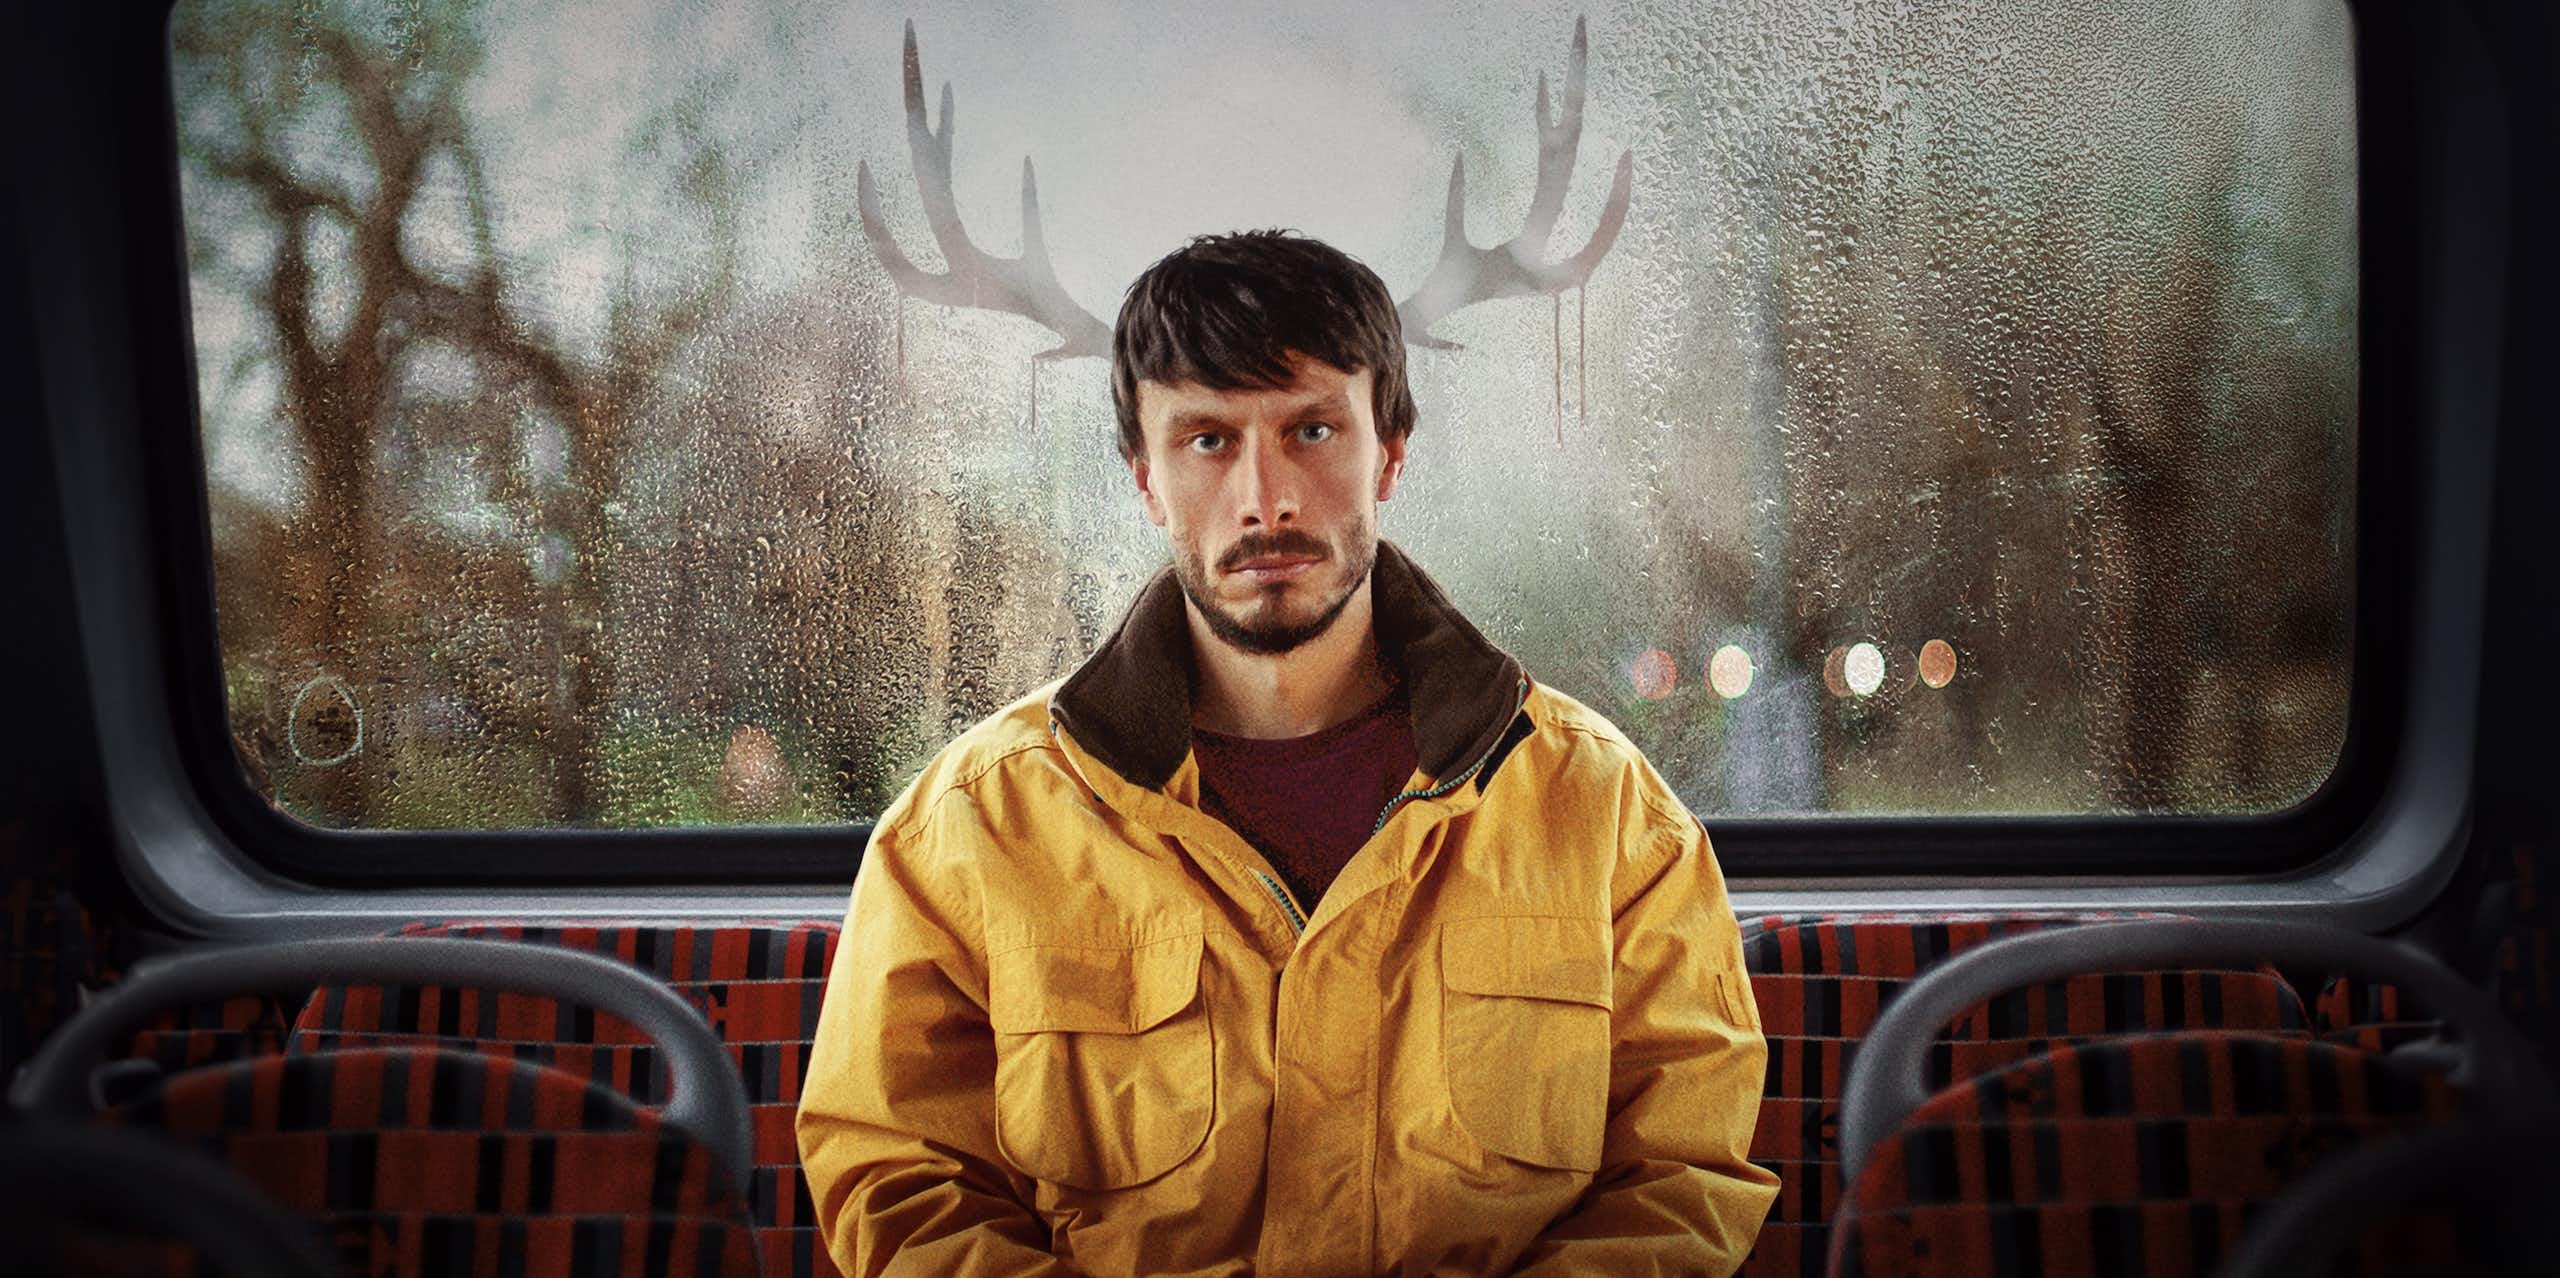 Donny on the bus with reindeer antlers drawn into the condensation in window behind him